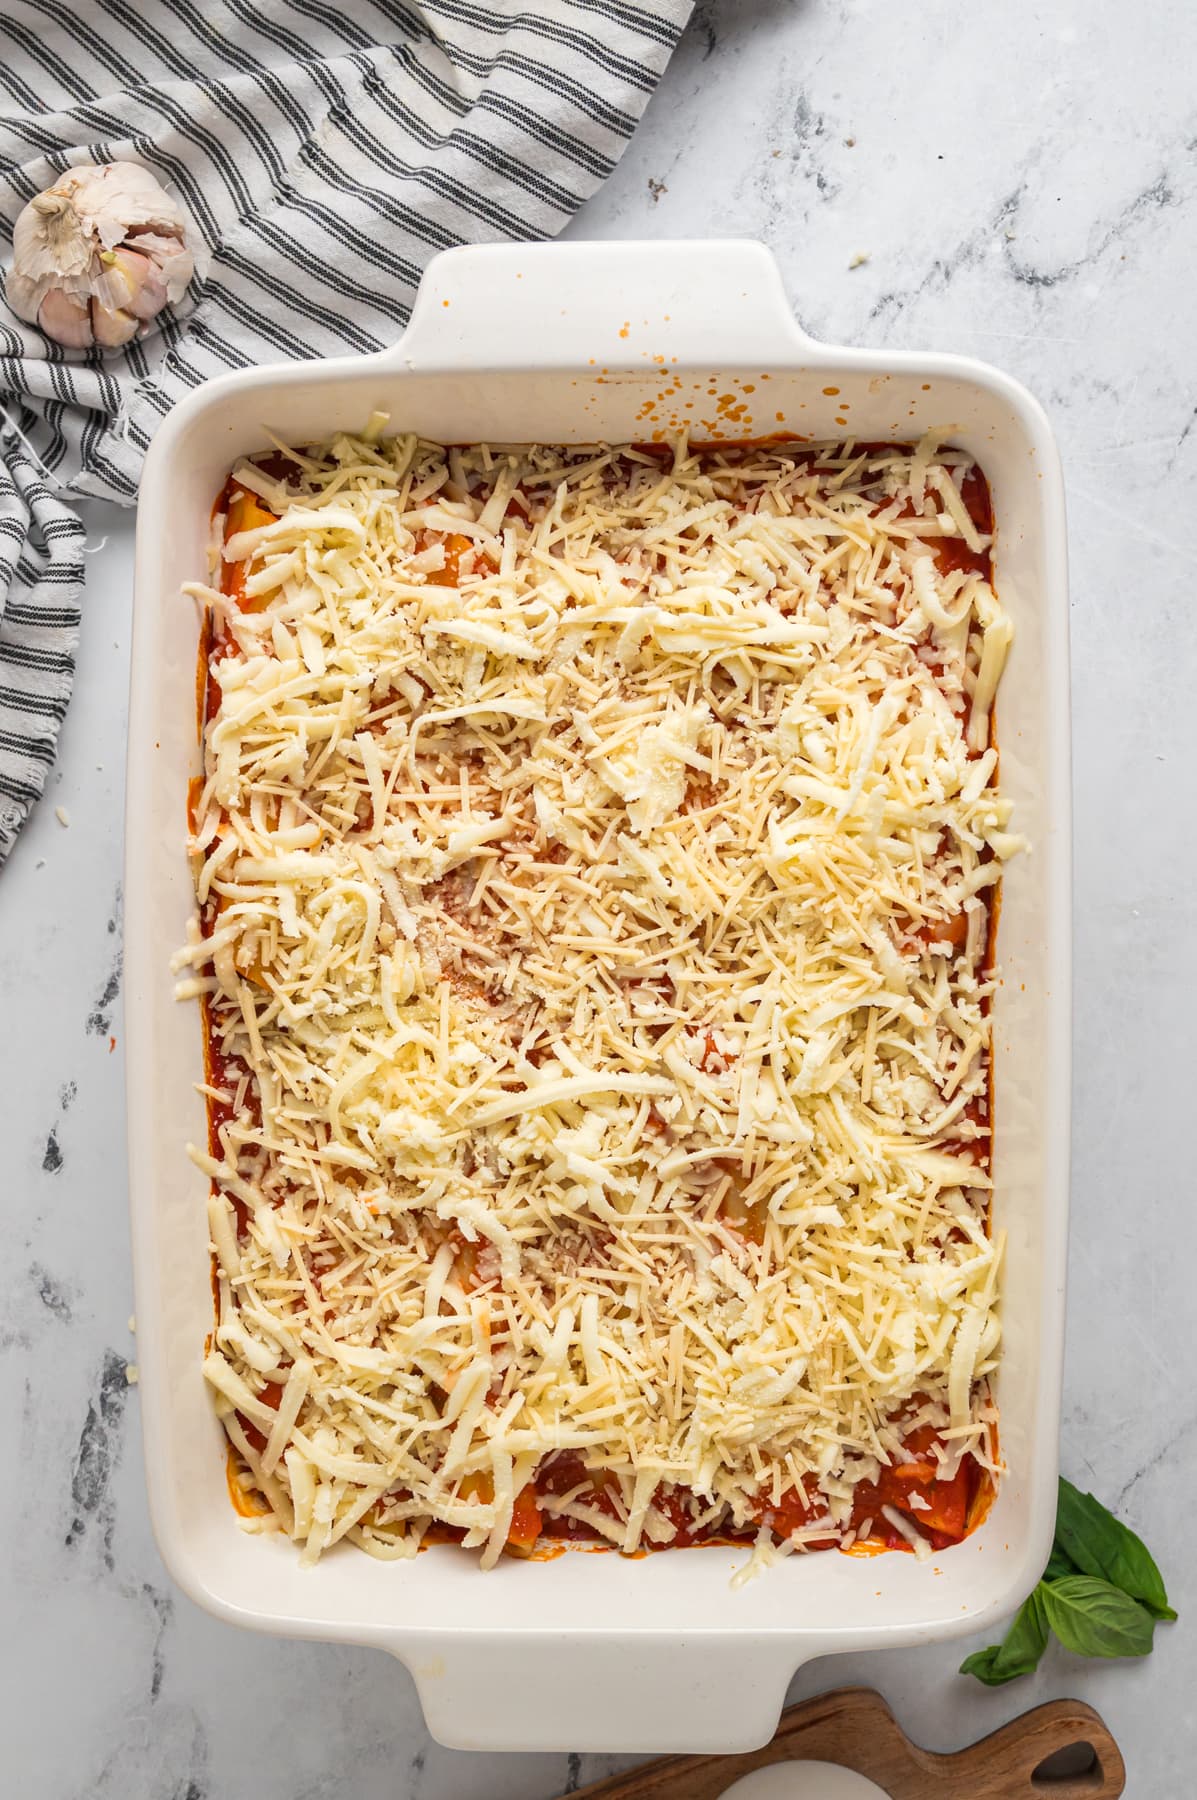 shredded cheese on top of Manicotti in baking dish